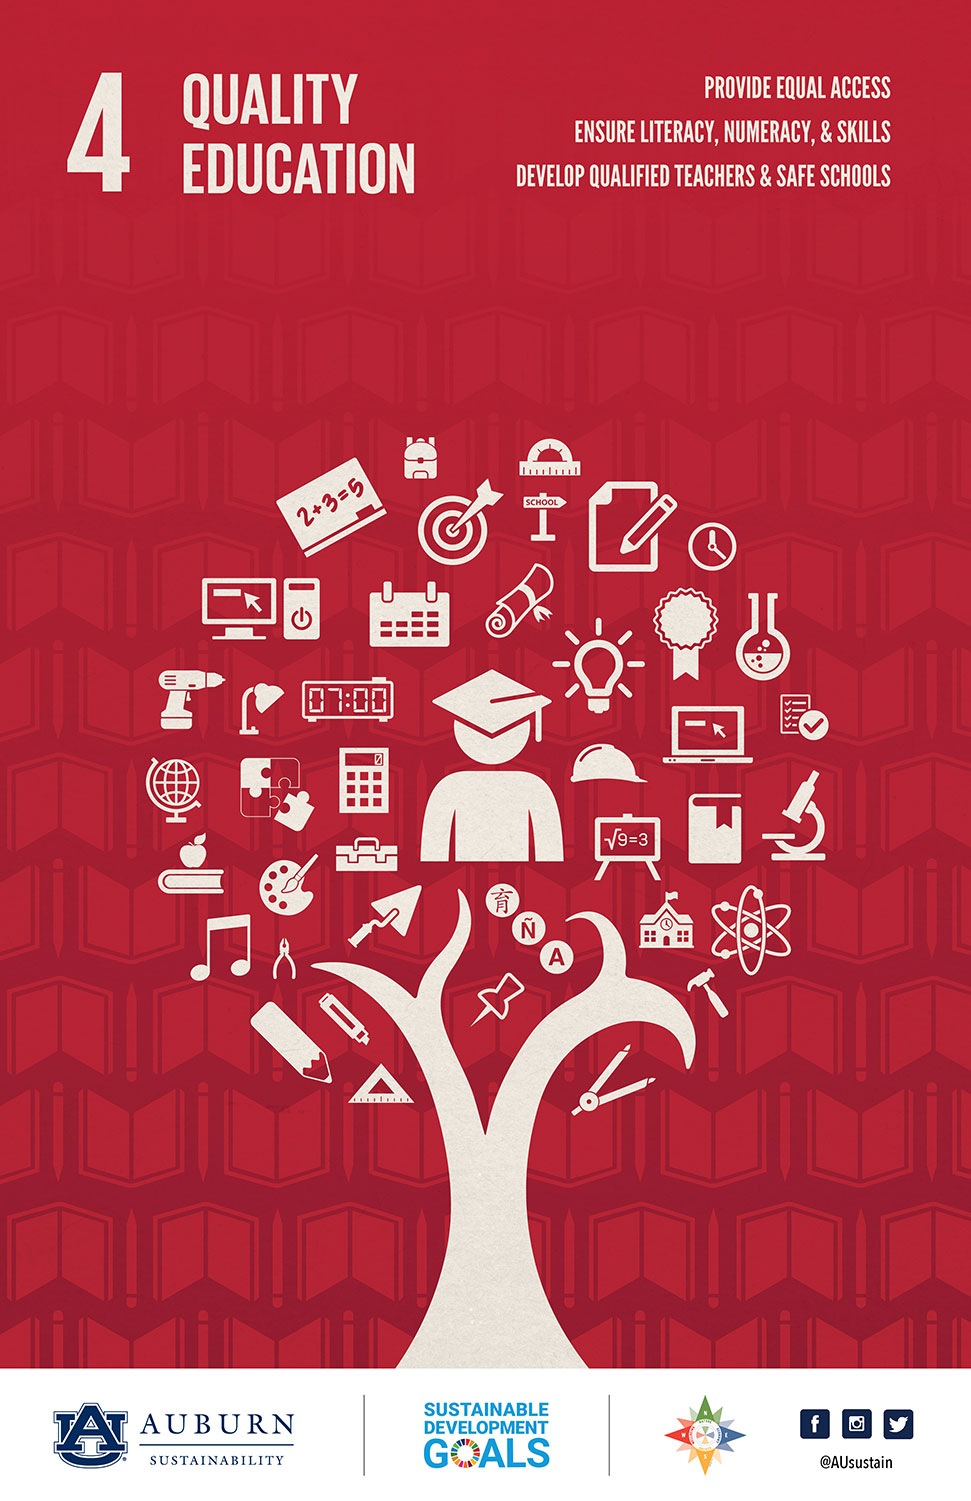 Sustainable Development Goal 4 Poster illustration: Quality Education. Goals include: Provide Equal Access, Ensure Literacy, Numeracy, and Skills, and Develop Qualified Teachers and Safe Schools.